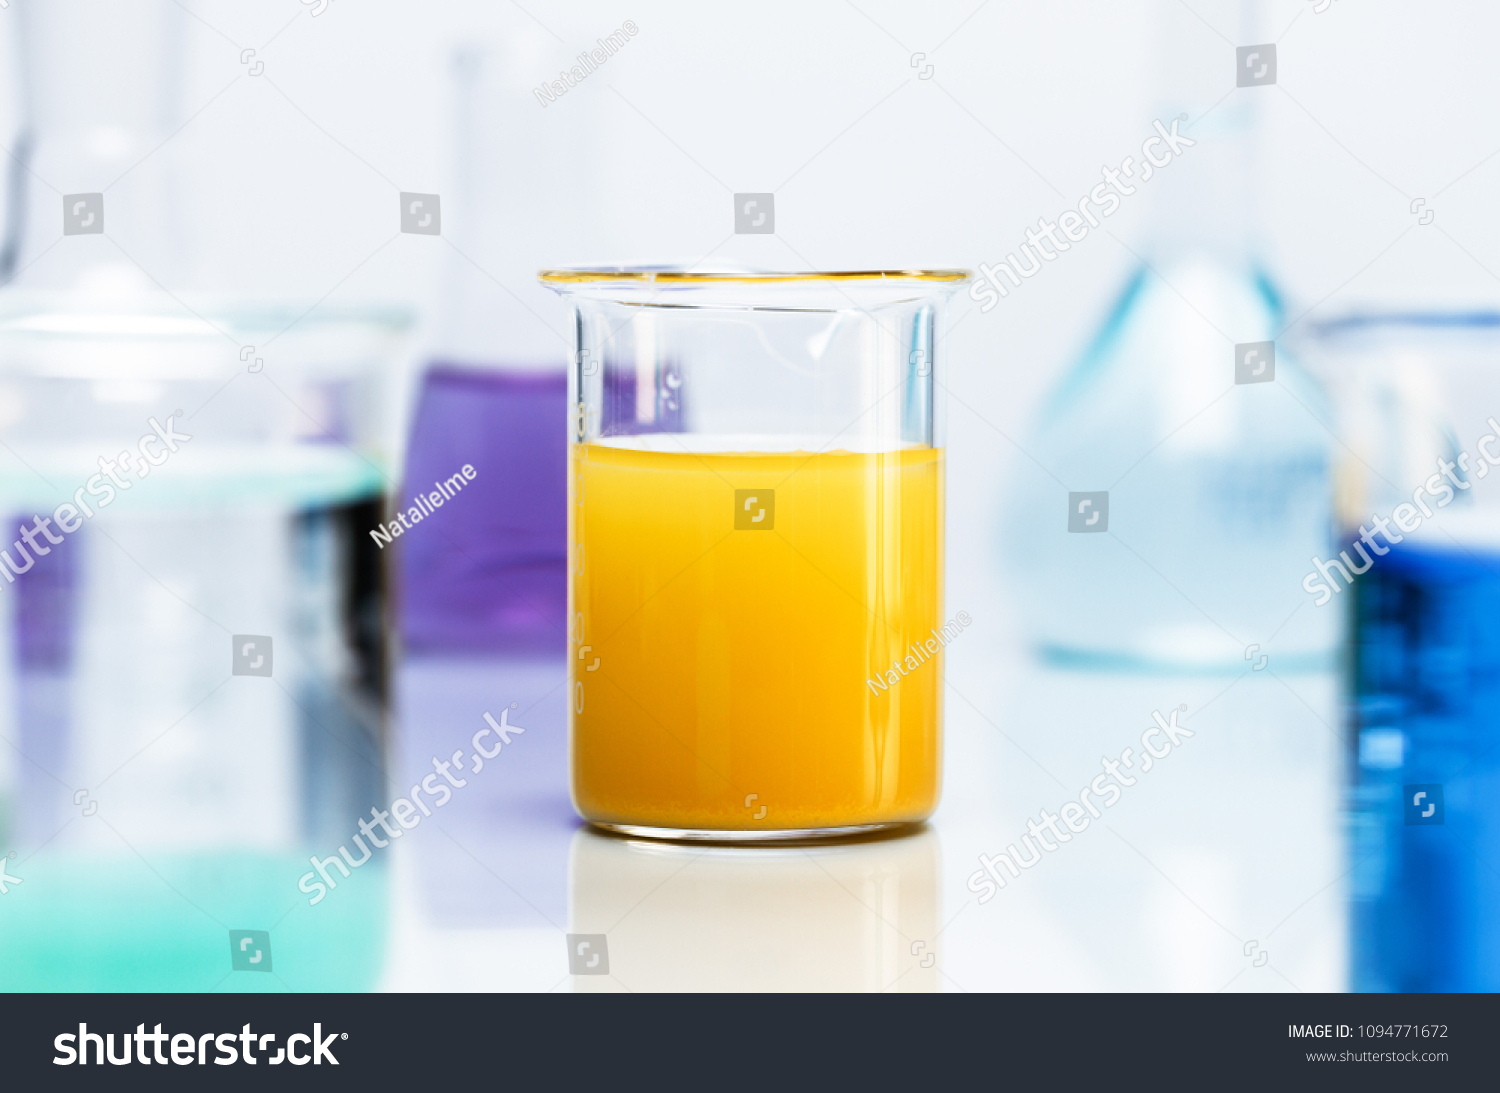 Yellow precipitate in a beaker, surrounded by various chemical lab glassware. #1094771672